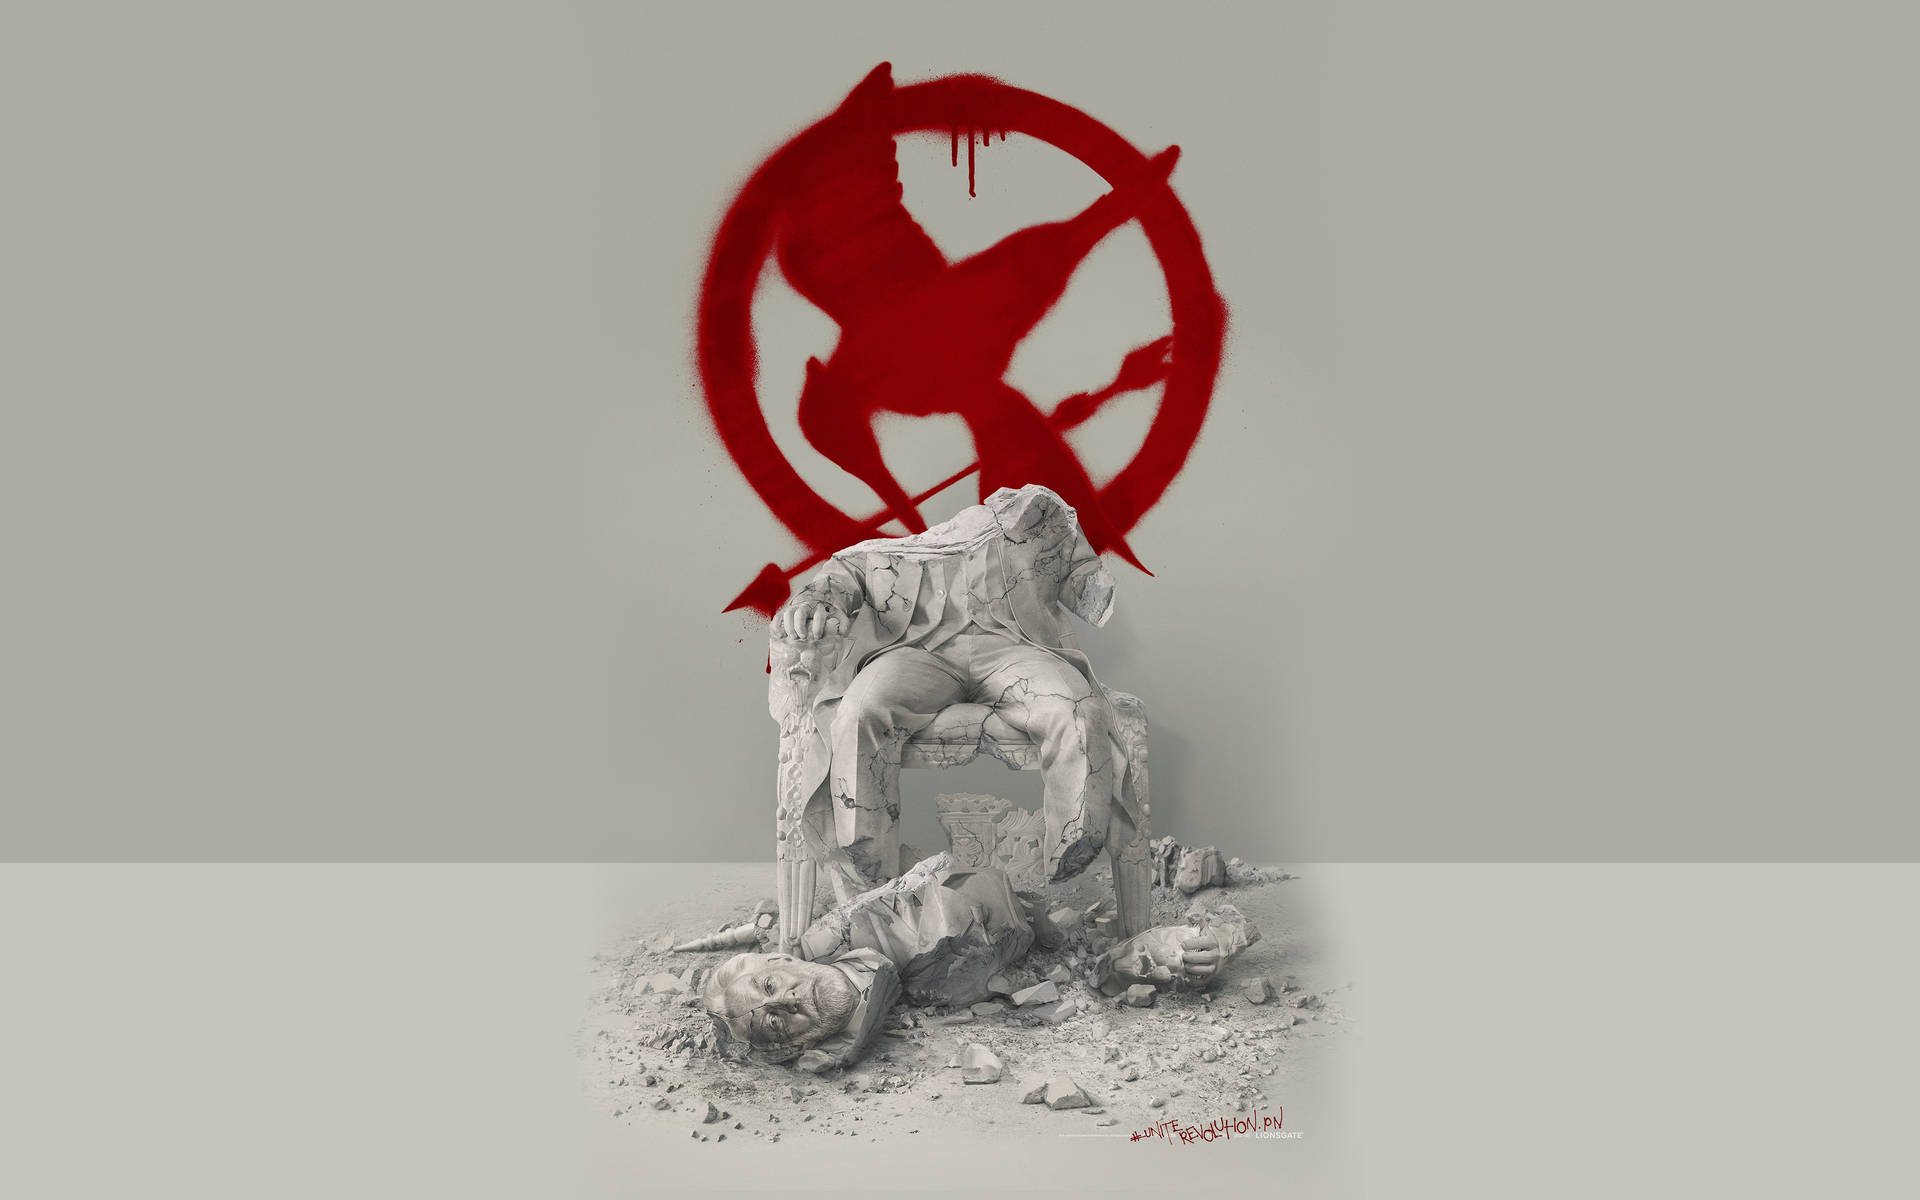 Katniss Everdeen Aiming Her Bow In The Wilderness Of The Hunger Games. Wallpaper